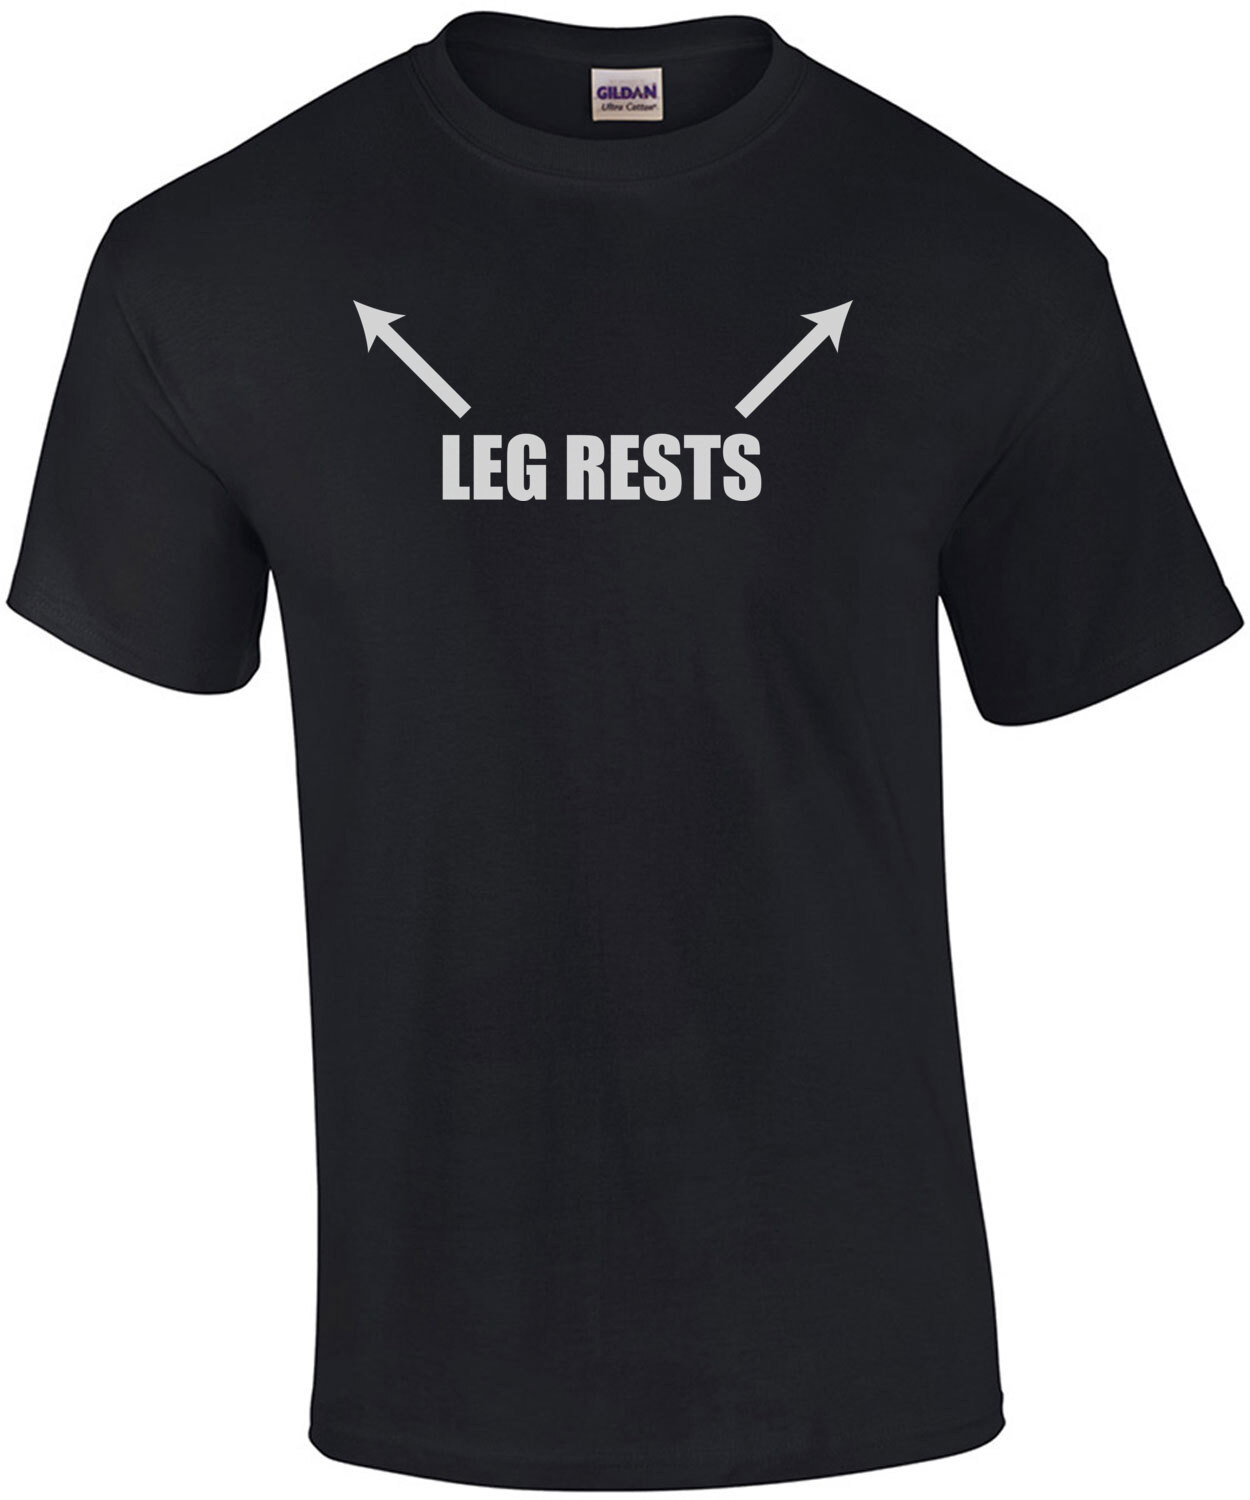 Leg Rests - Funny Sexual Offensive T-Shirt